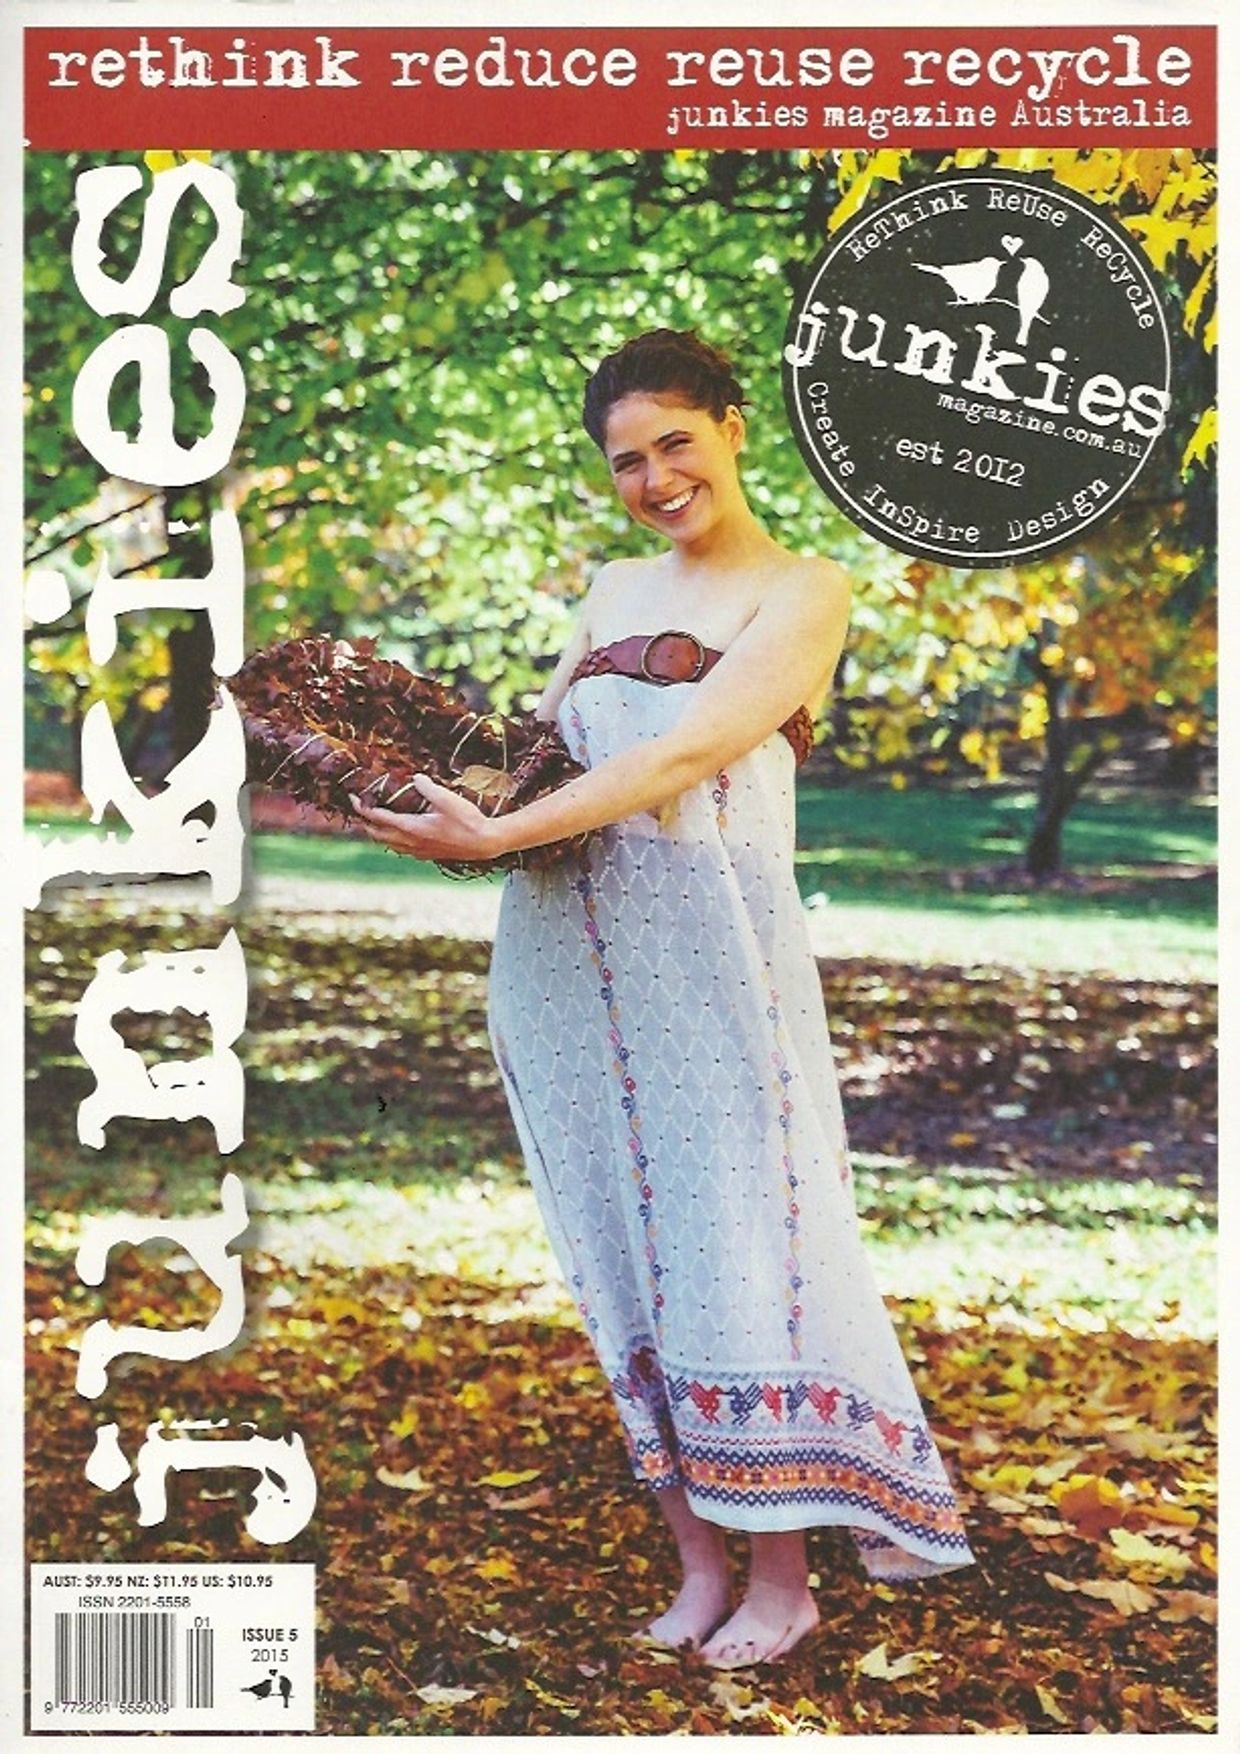 Cover of Junkies Magazine, Issue 5, 2015.